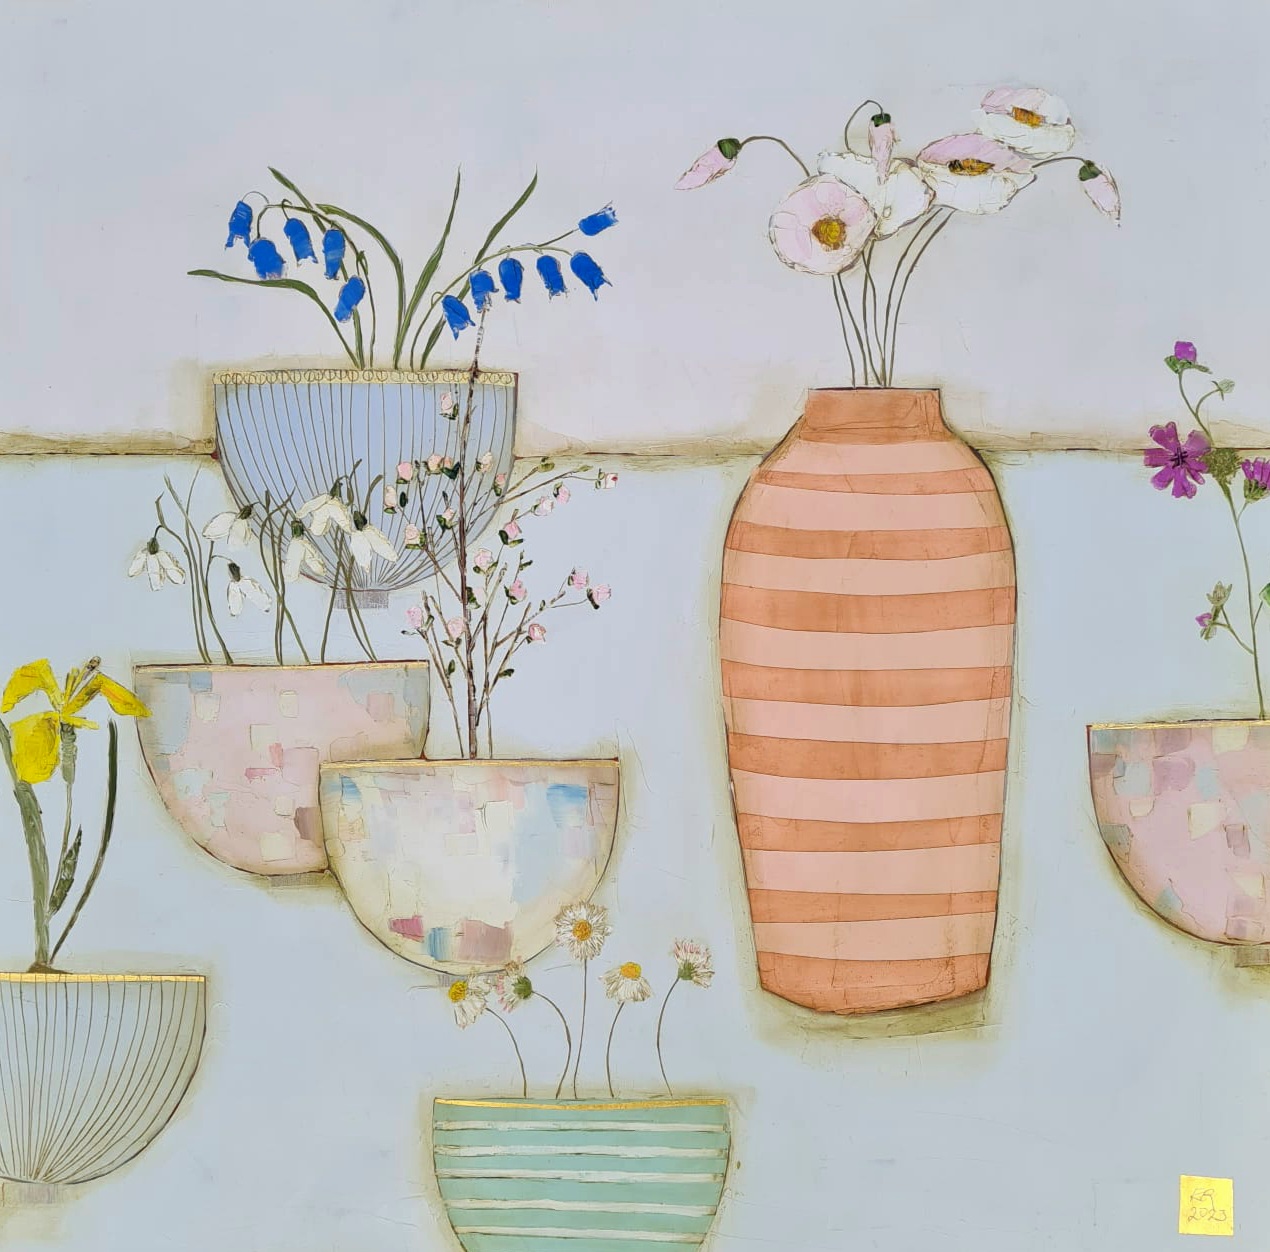 Eithne  Roberts - Looking forward to spring